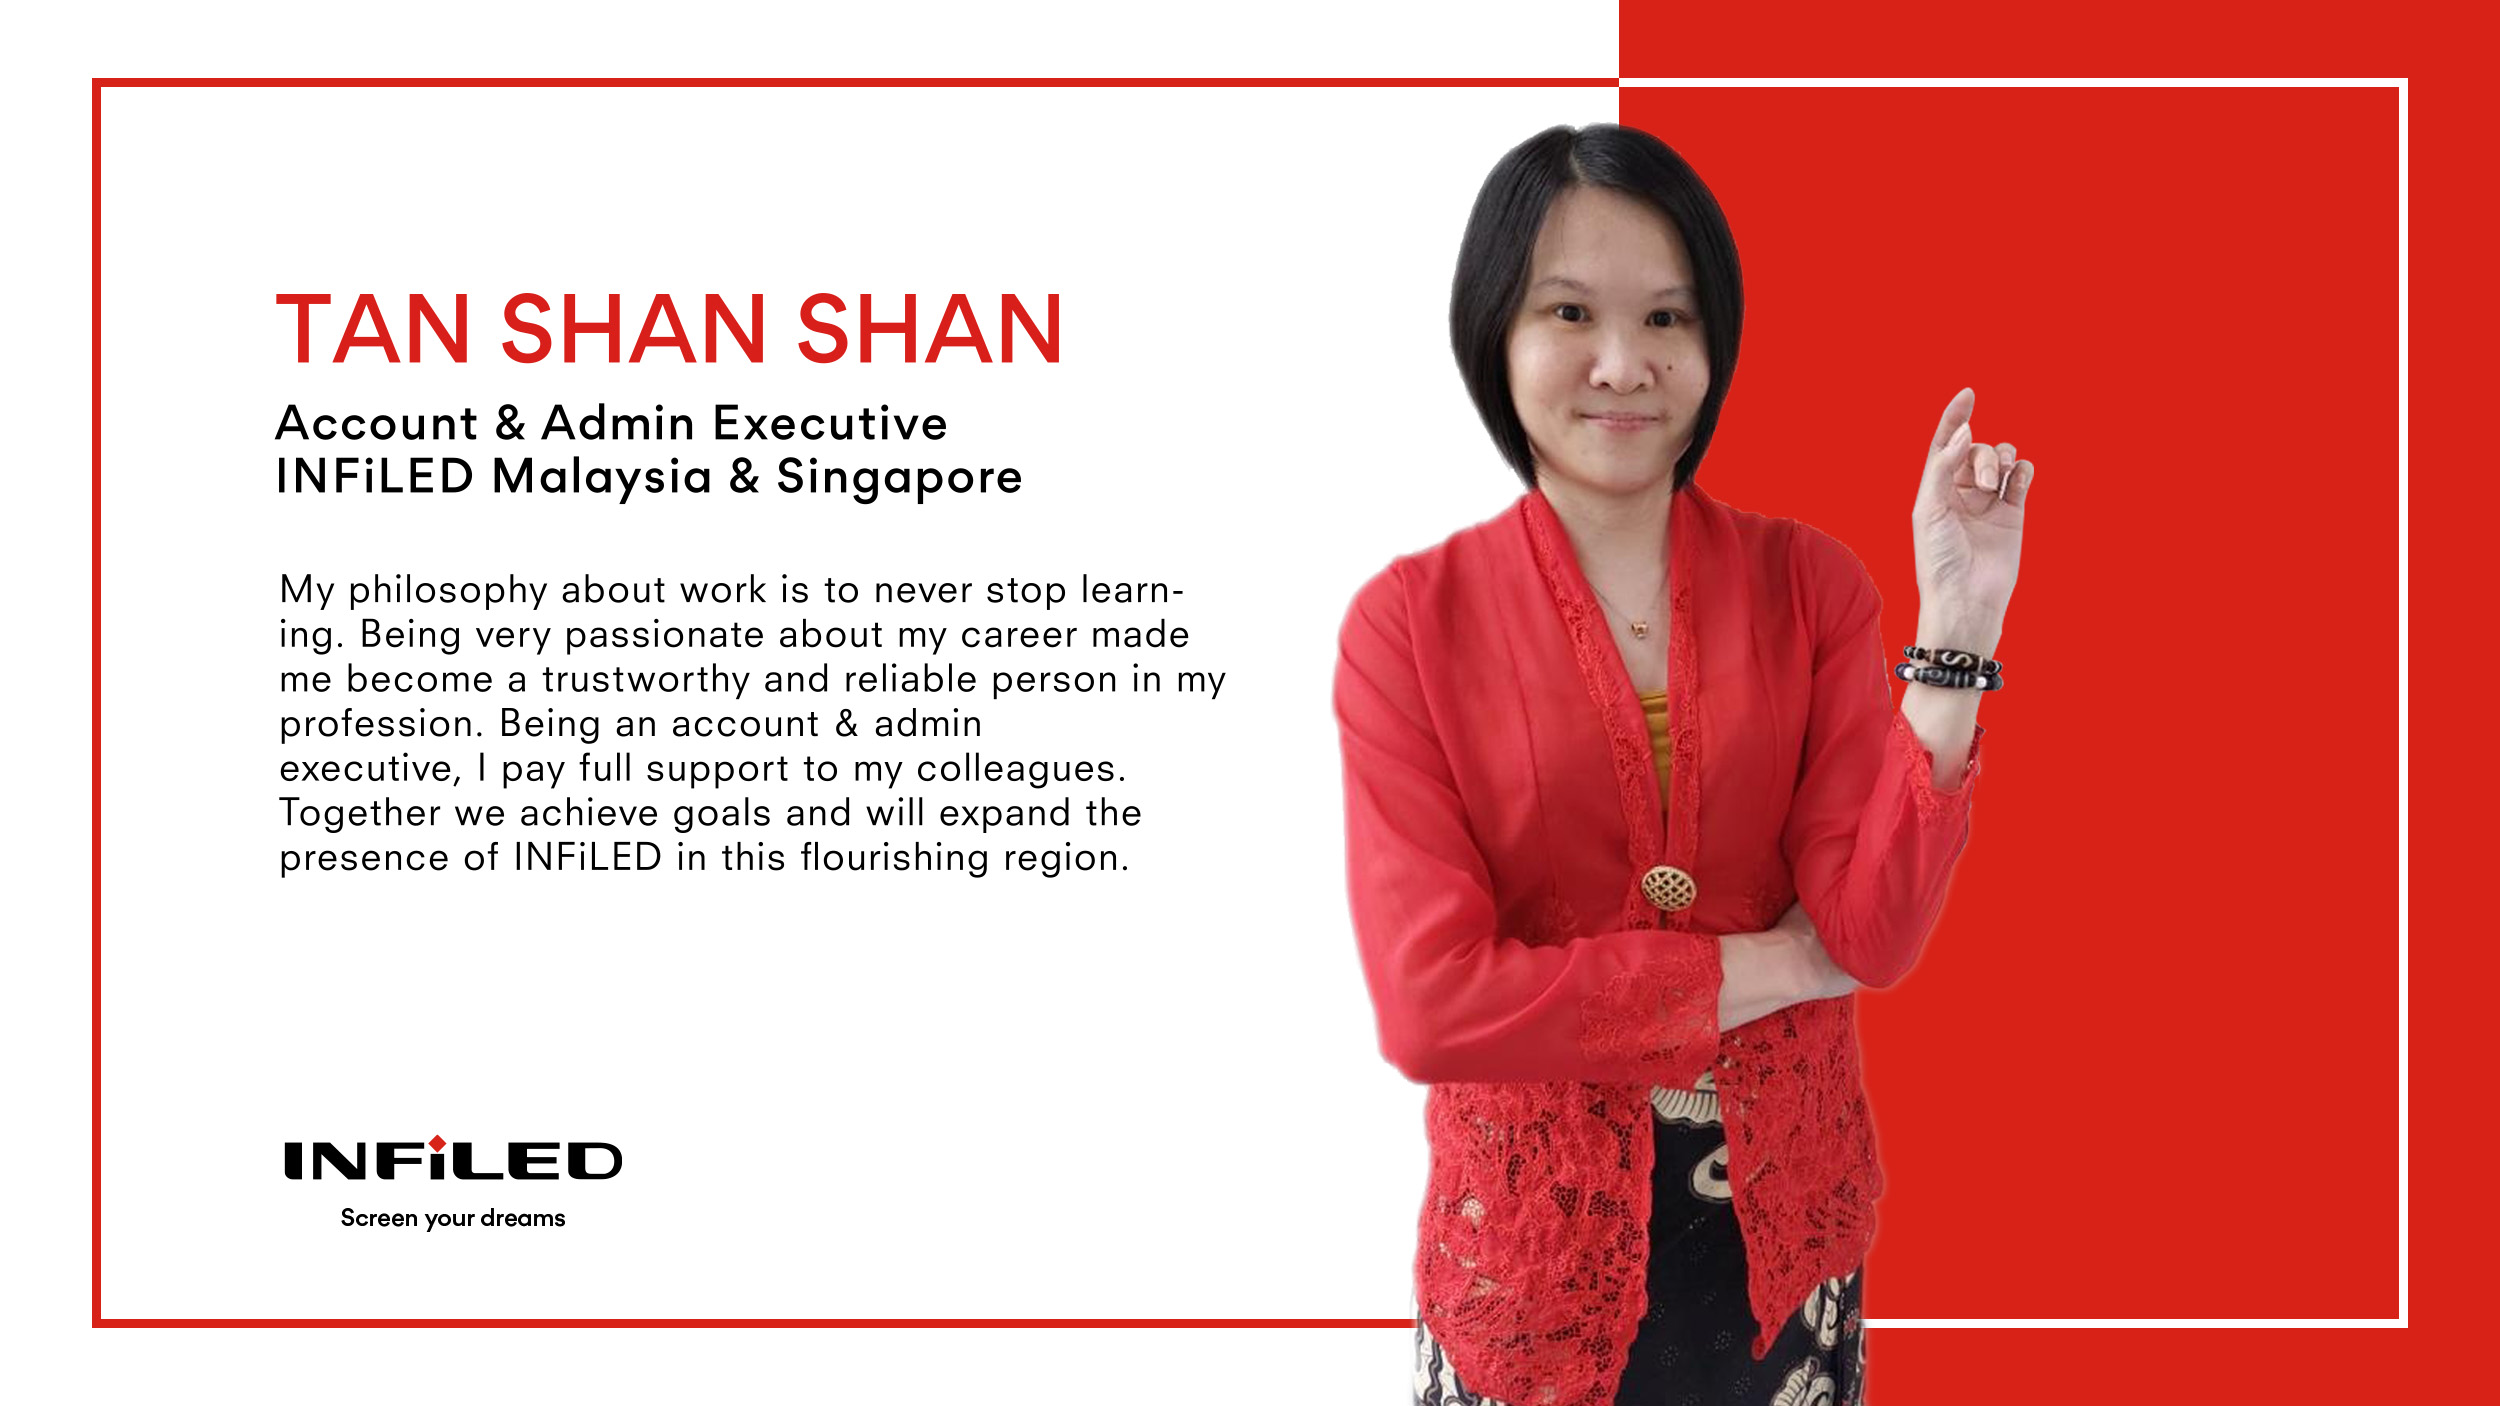 INFiLED Appoints Tan Shan Shan as Account & Admin Executive for Malaysia & Singapore